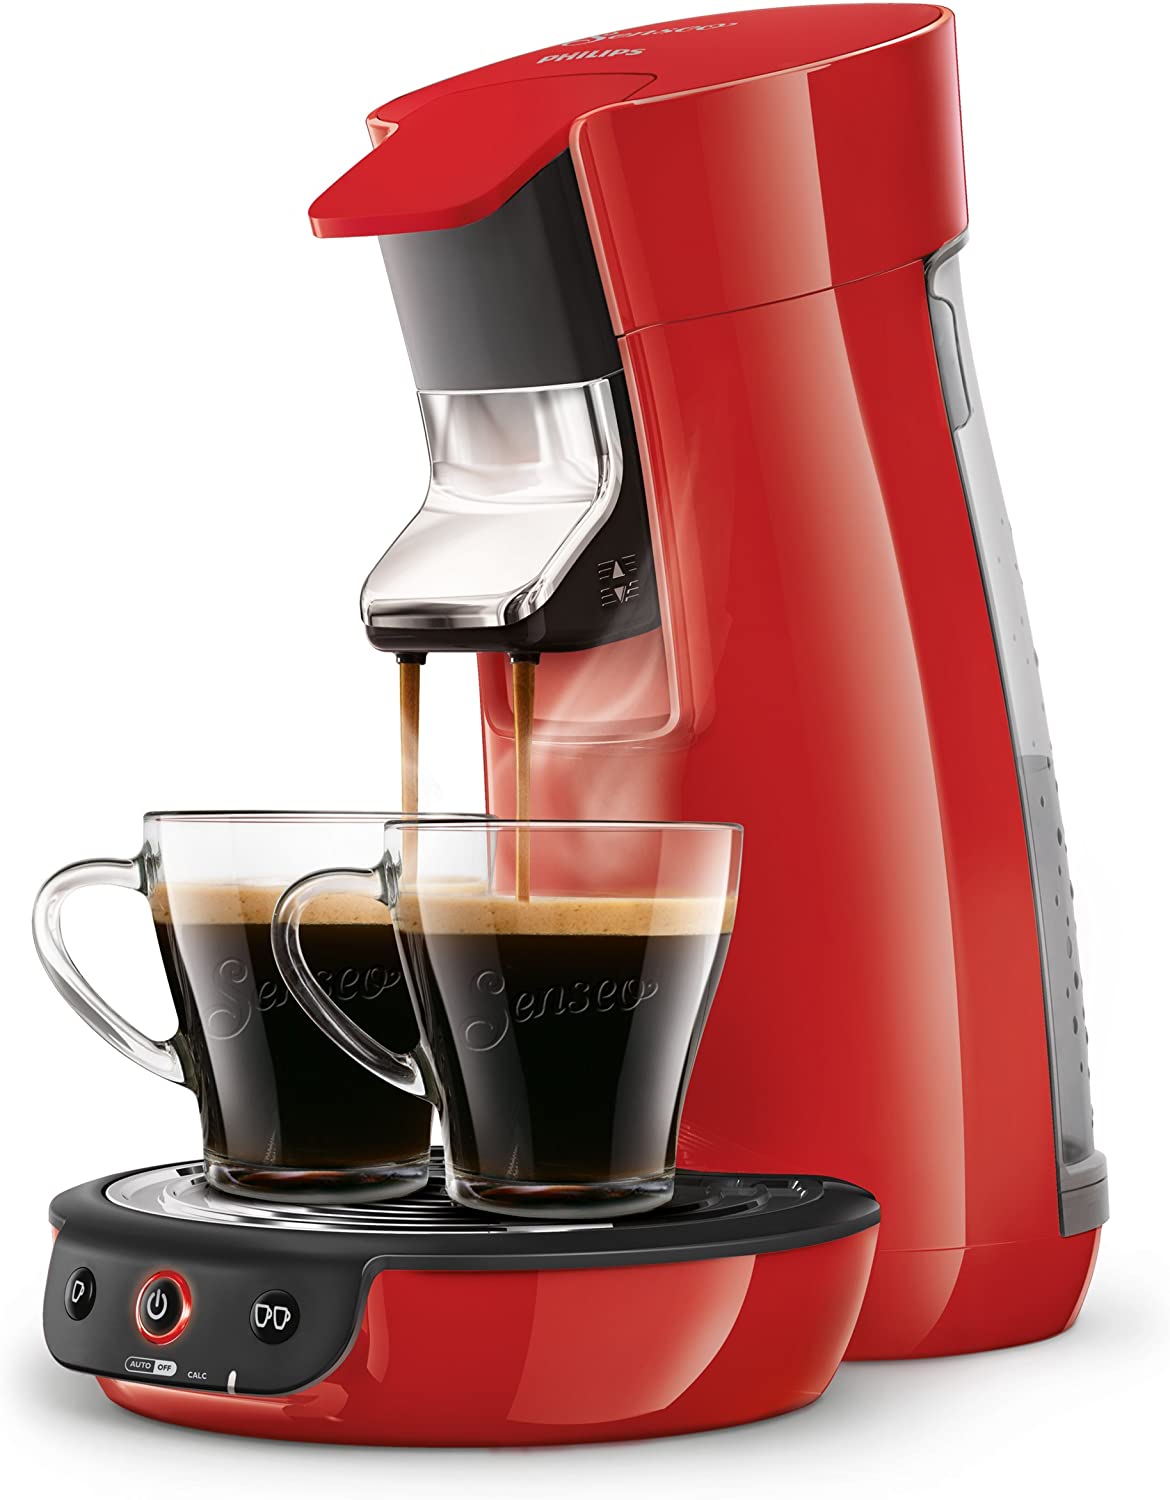 Philips Senseo HD7829/80 coffee maker - coffee makers (Poland, Stainless steel)